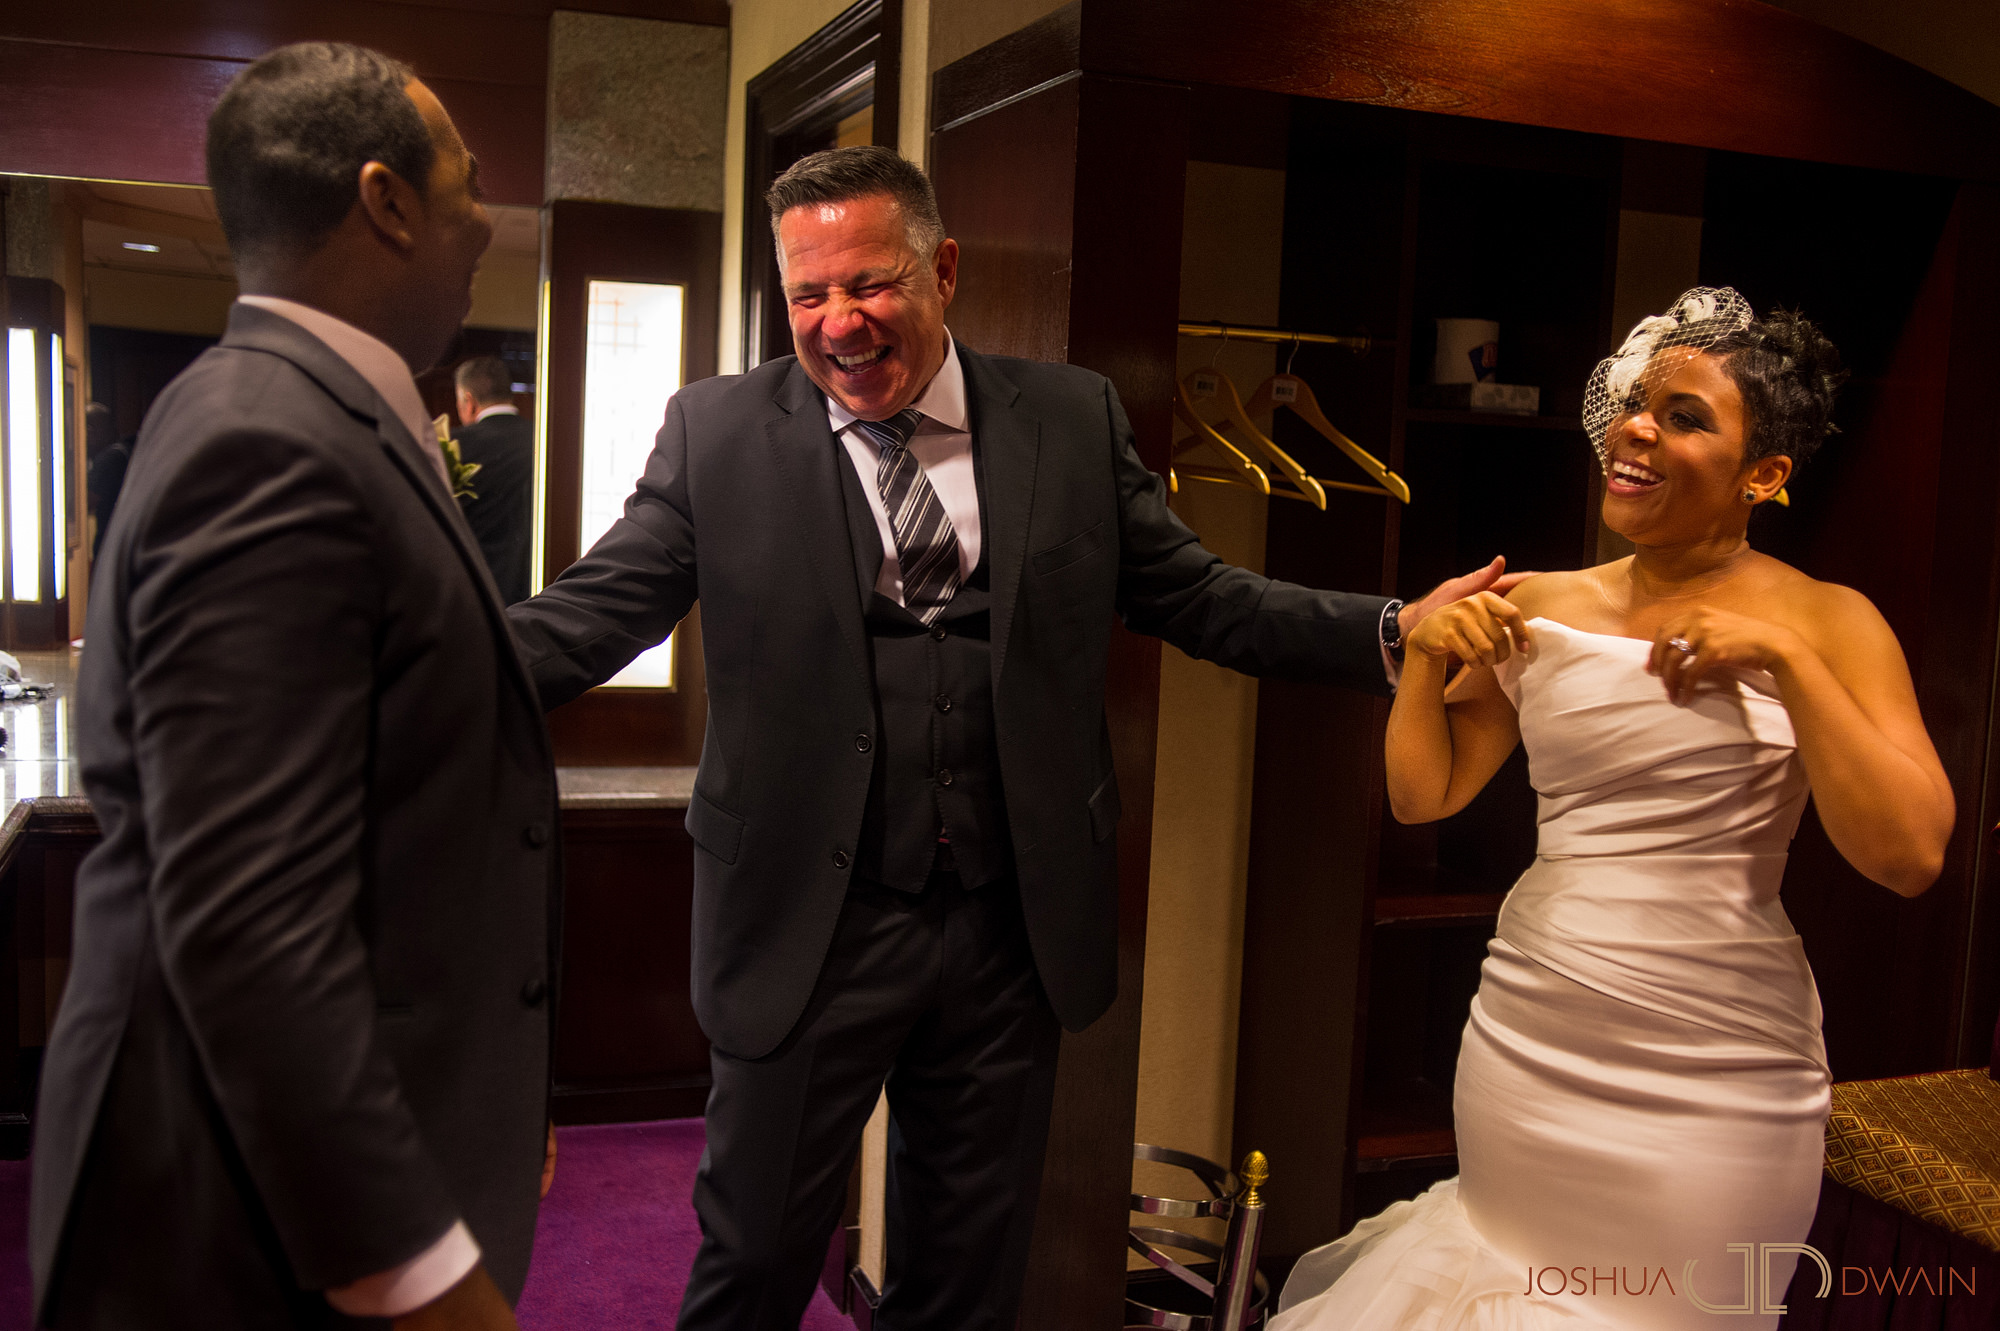 Adrienne & Chad's Wedding at Crest Hollow Country Club in Long Island, NY